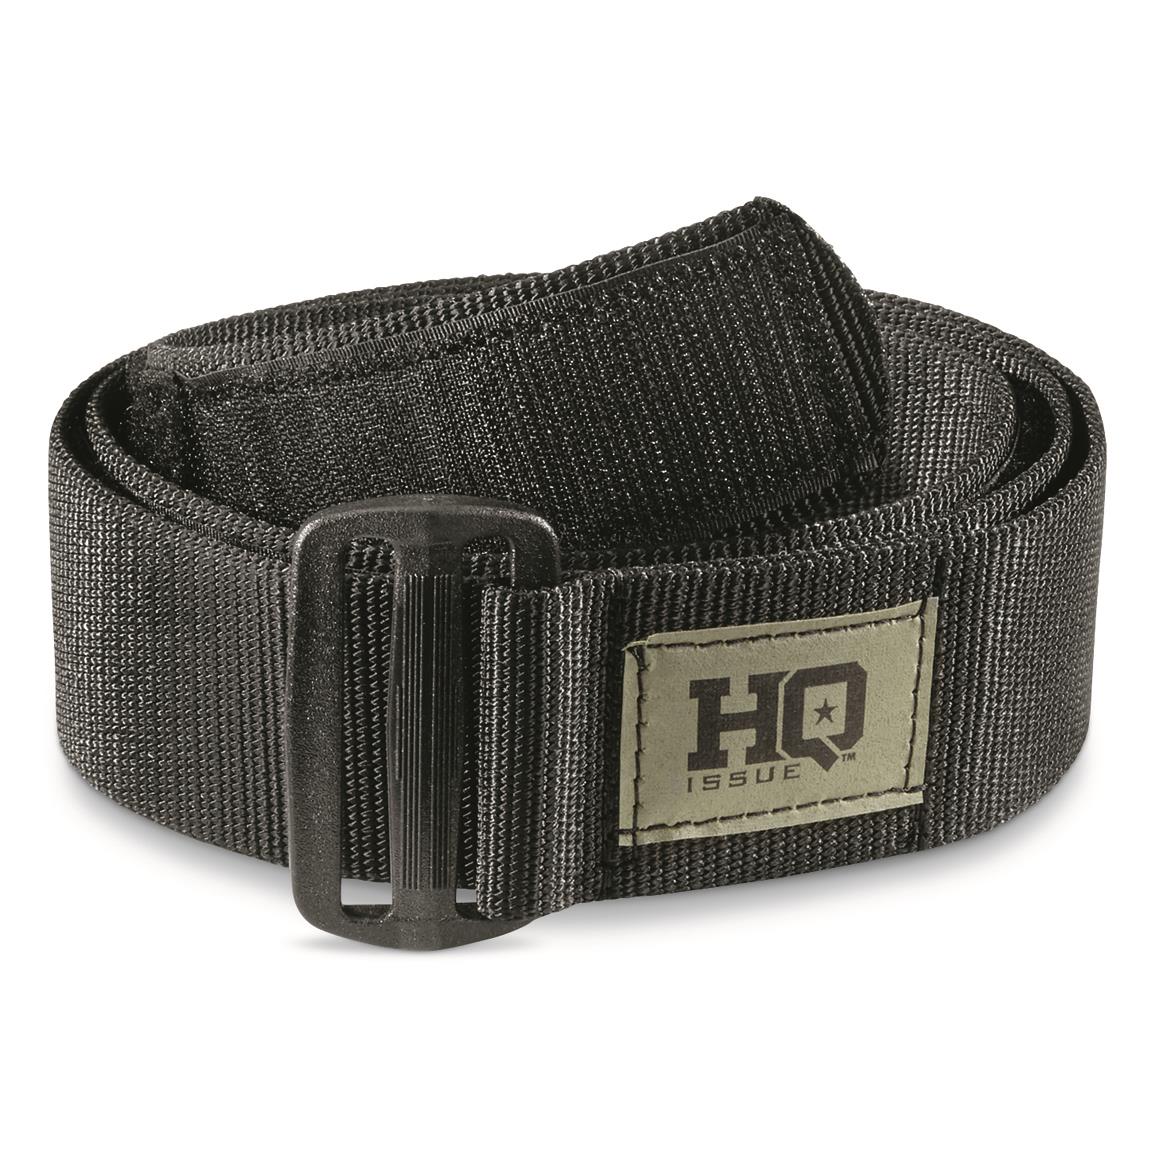 HQ ISSUE US Made Tactical Belt, Black